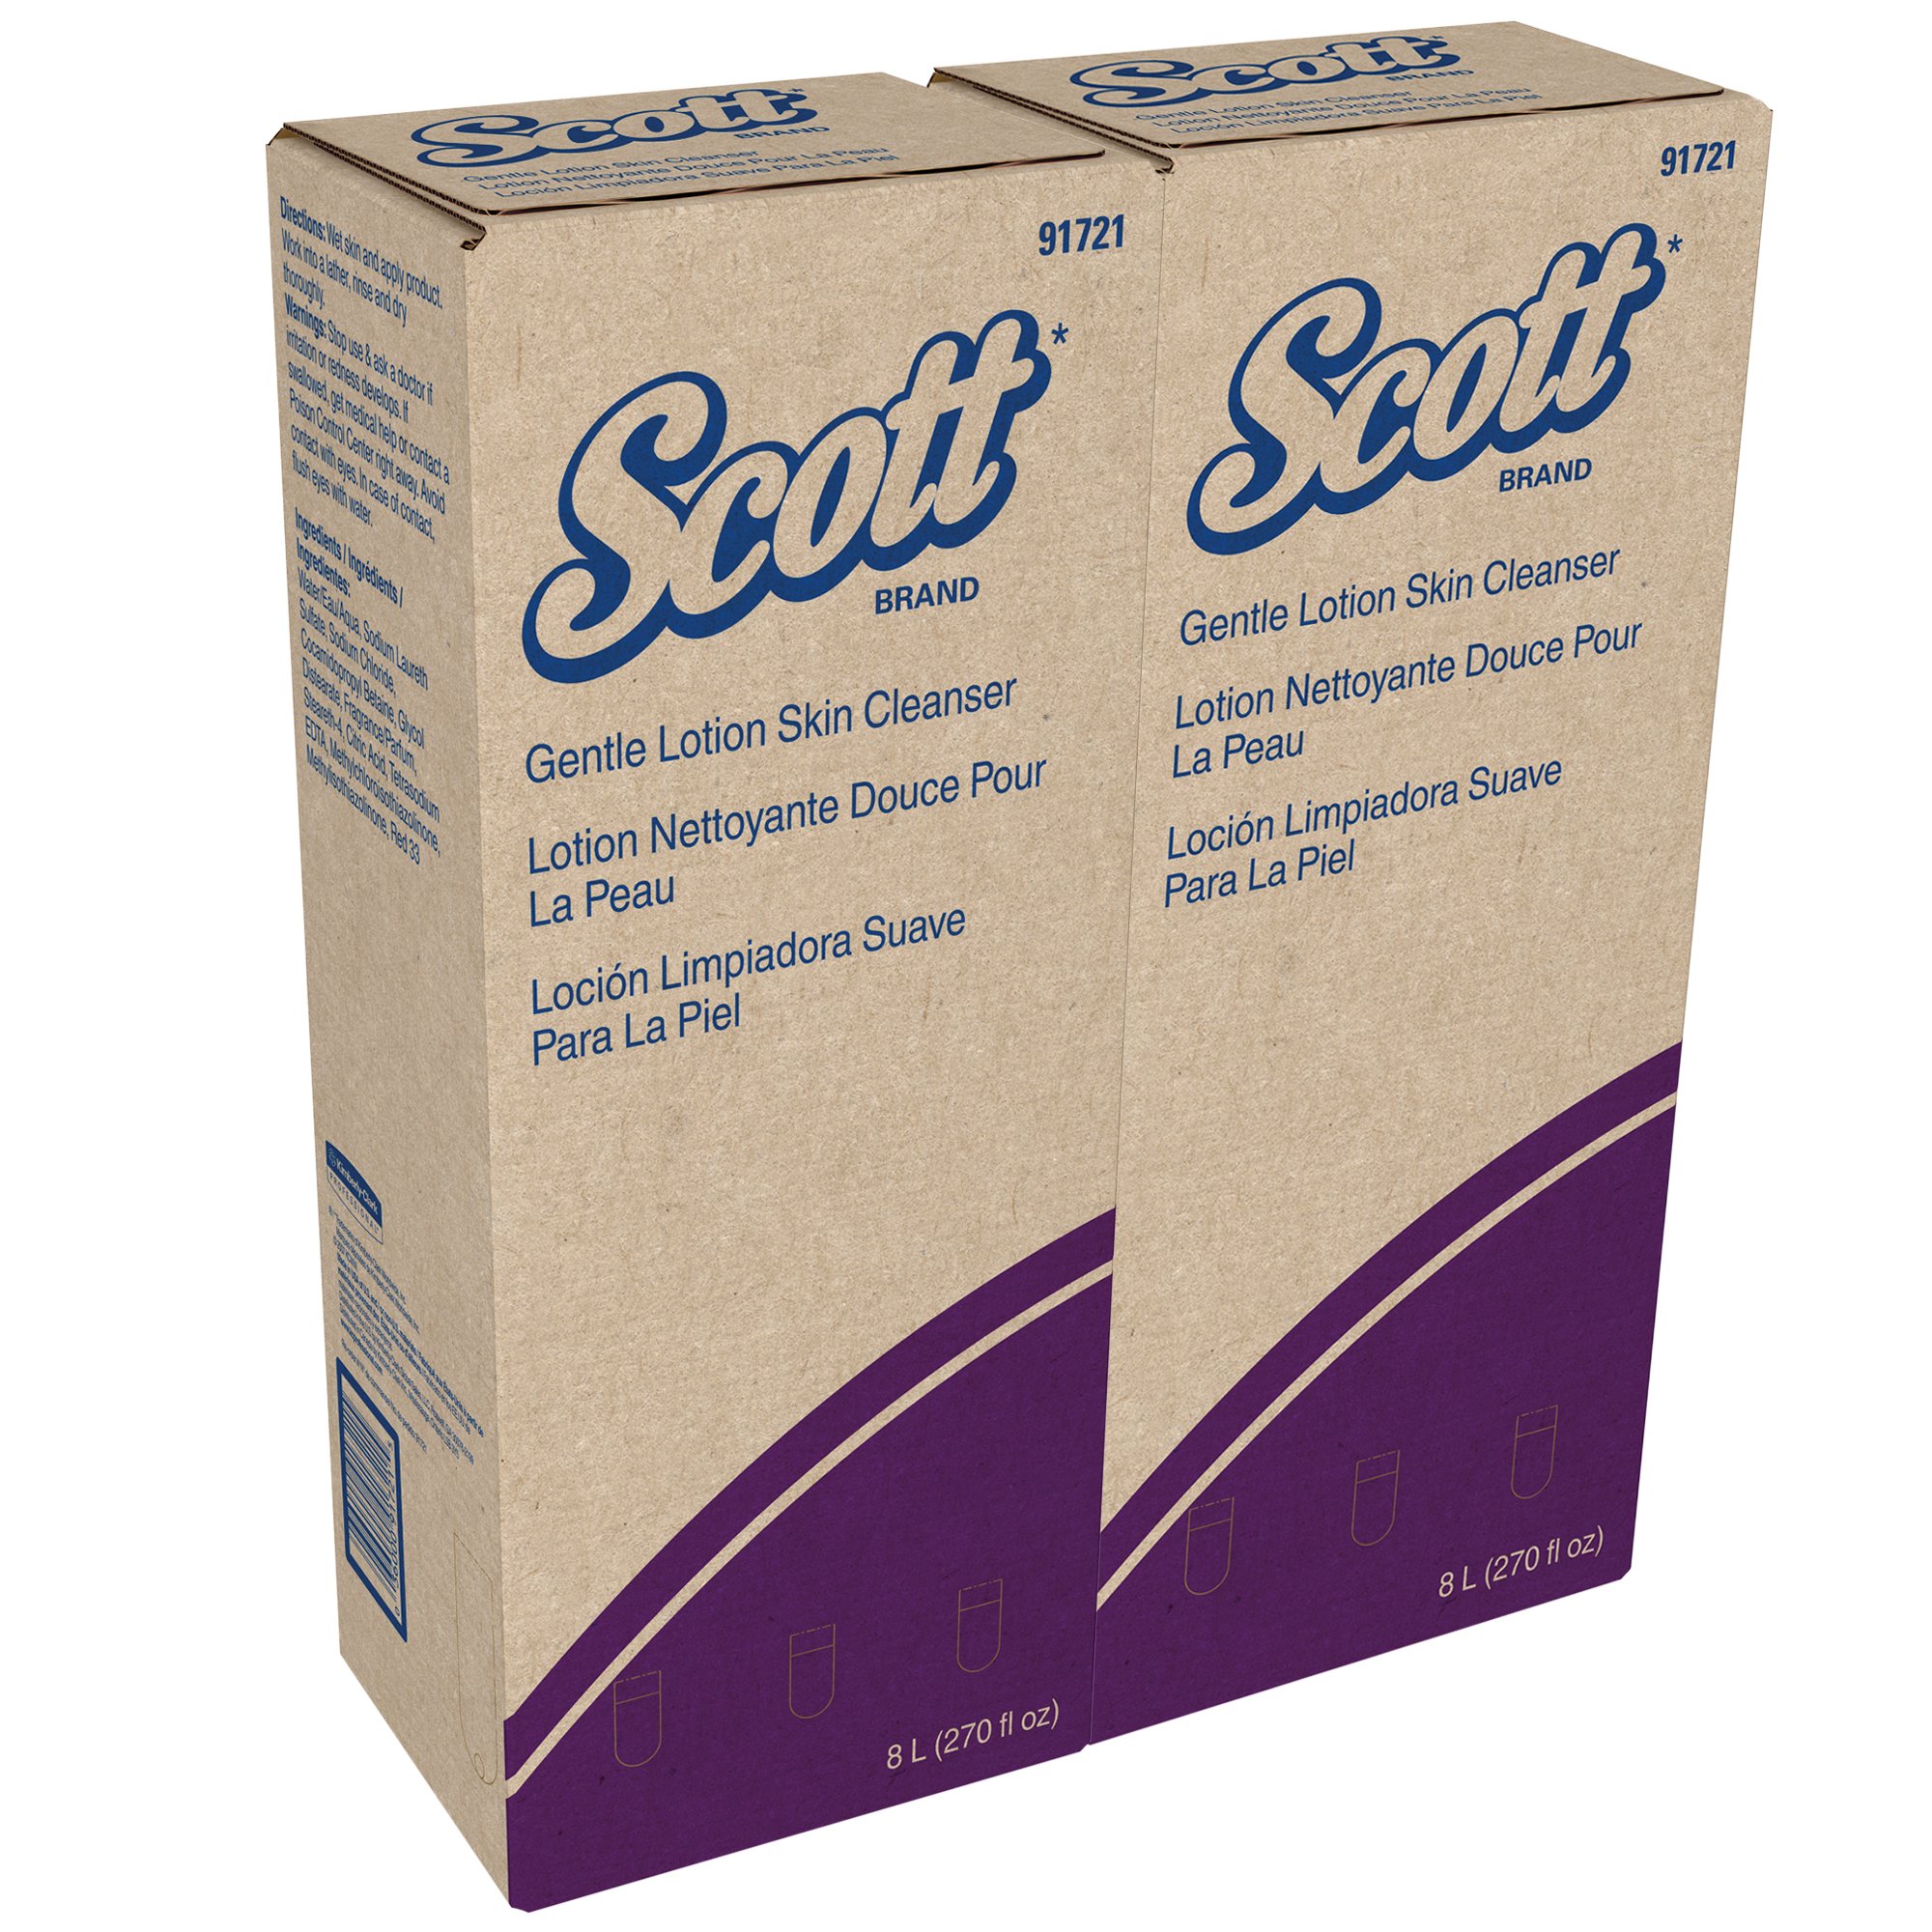 Scott 91721 Lotion Hand Soap Cartridge Refill, Pink, Floral Scent, 8 Liters (Case of 2)